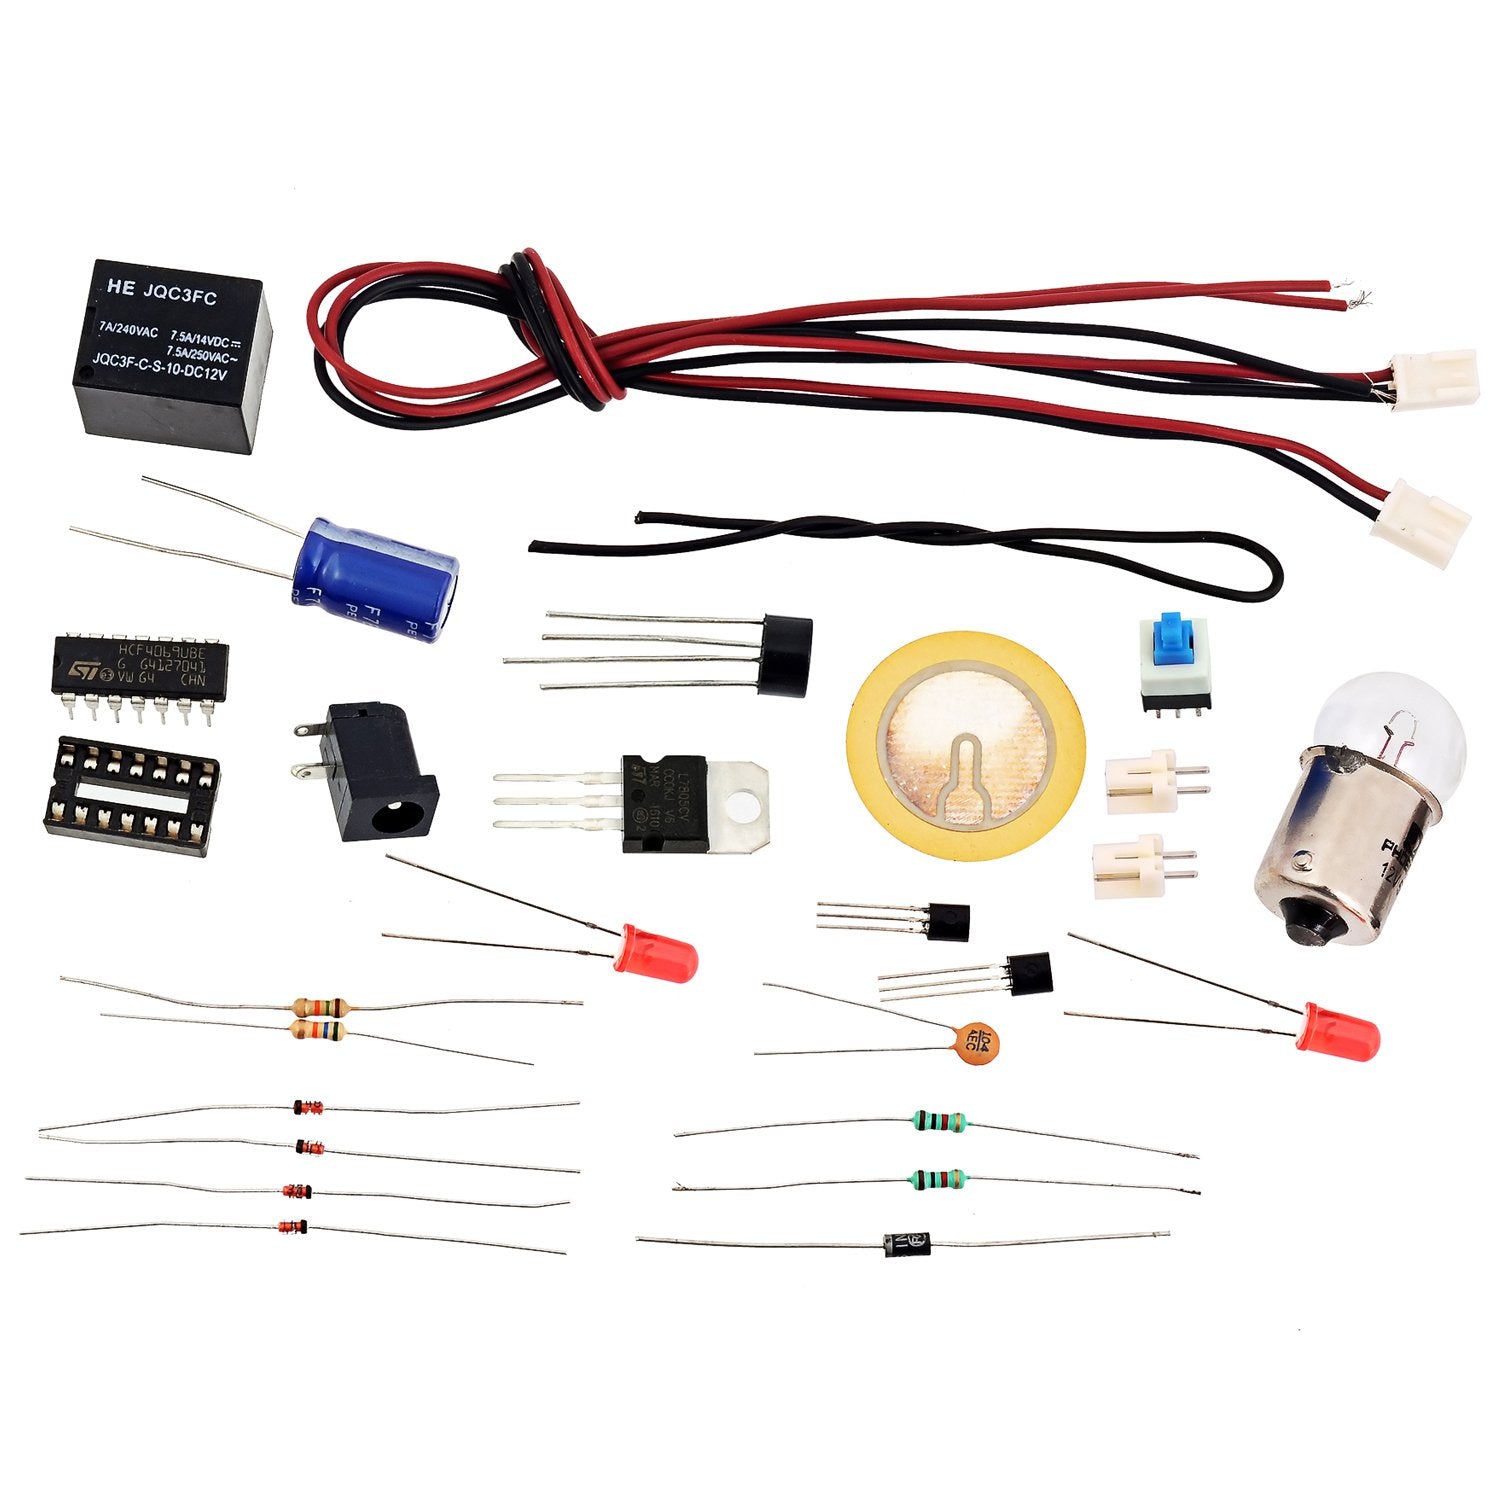 DIY-electronic-projects-kits